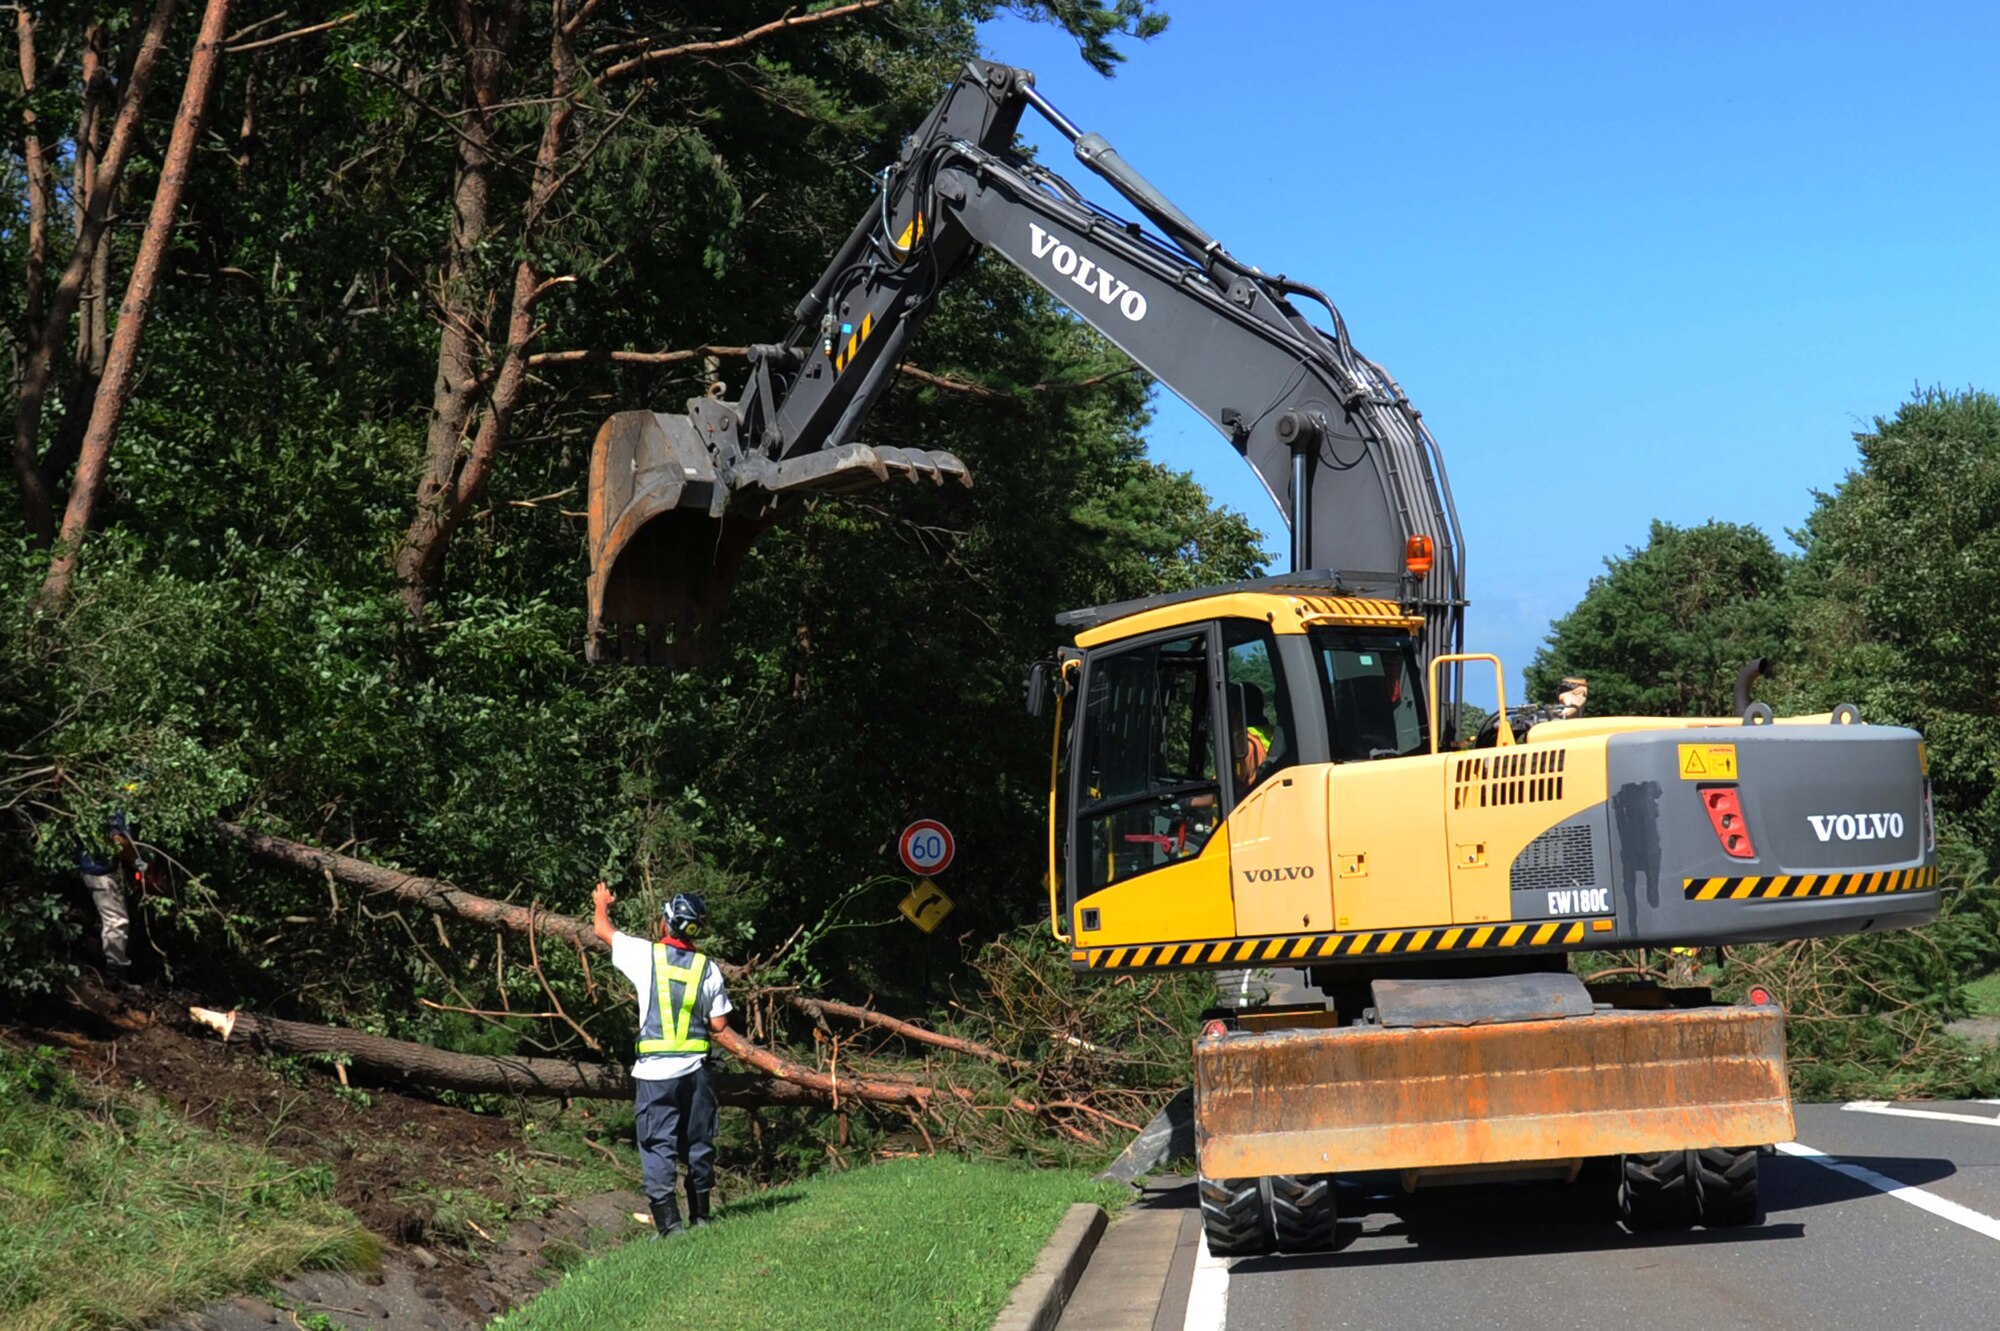 Members of the 35th Civil Engineer Squadron remove fallen trees from road ways at Misawa Air Base, Japan, Aug. 31, 2016. The 35th CES responded the morning after the storm and began clean up around the base.  (U.S. Air Force photo by Tech. Sgt. April Quintanilla)